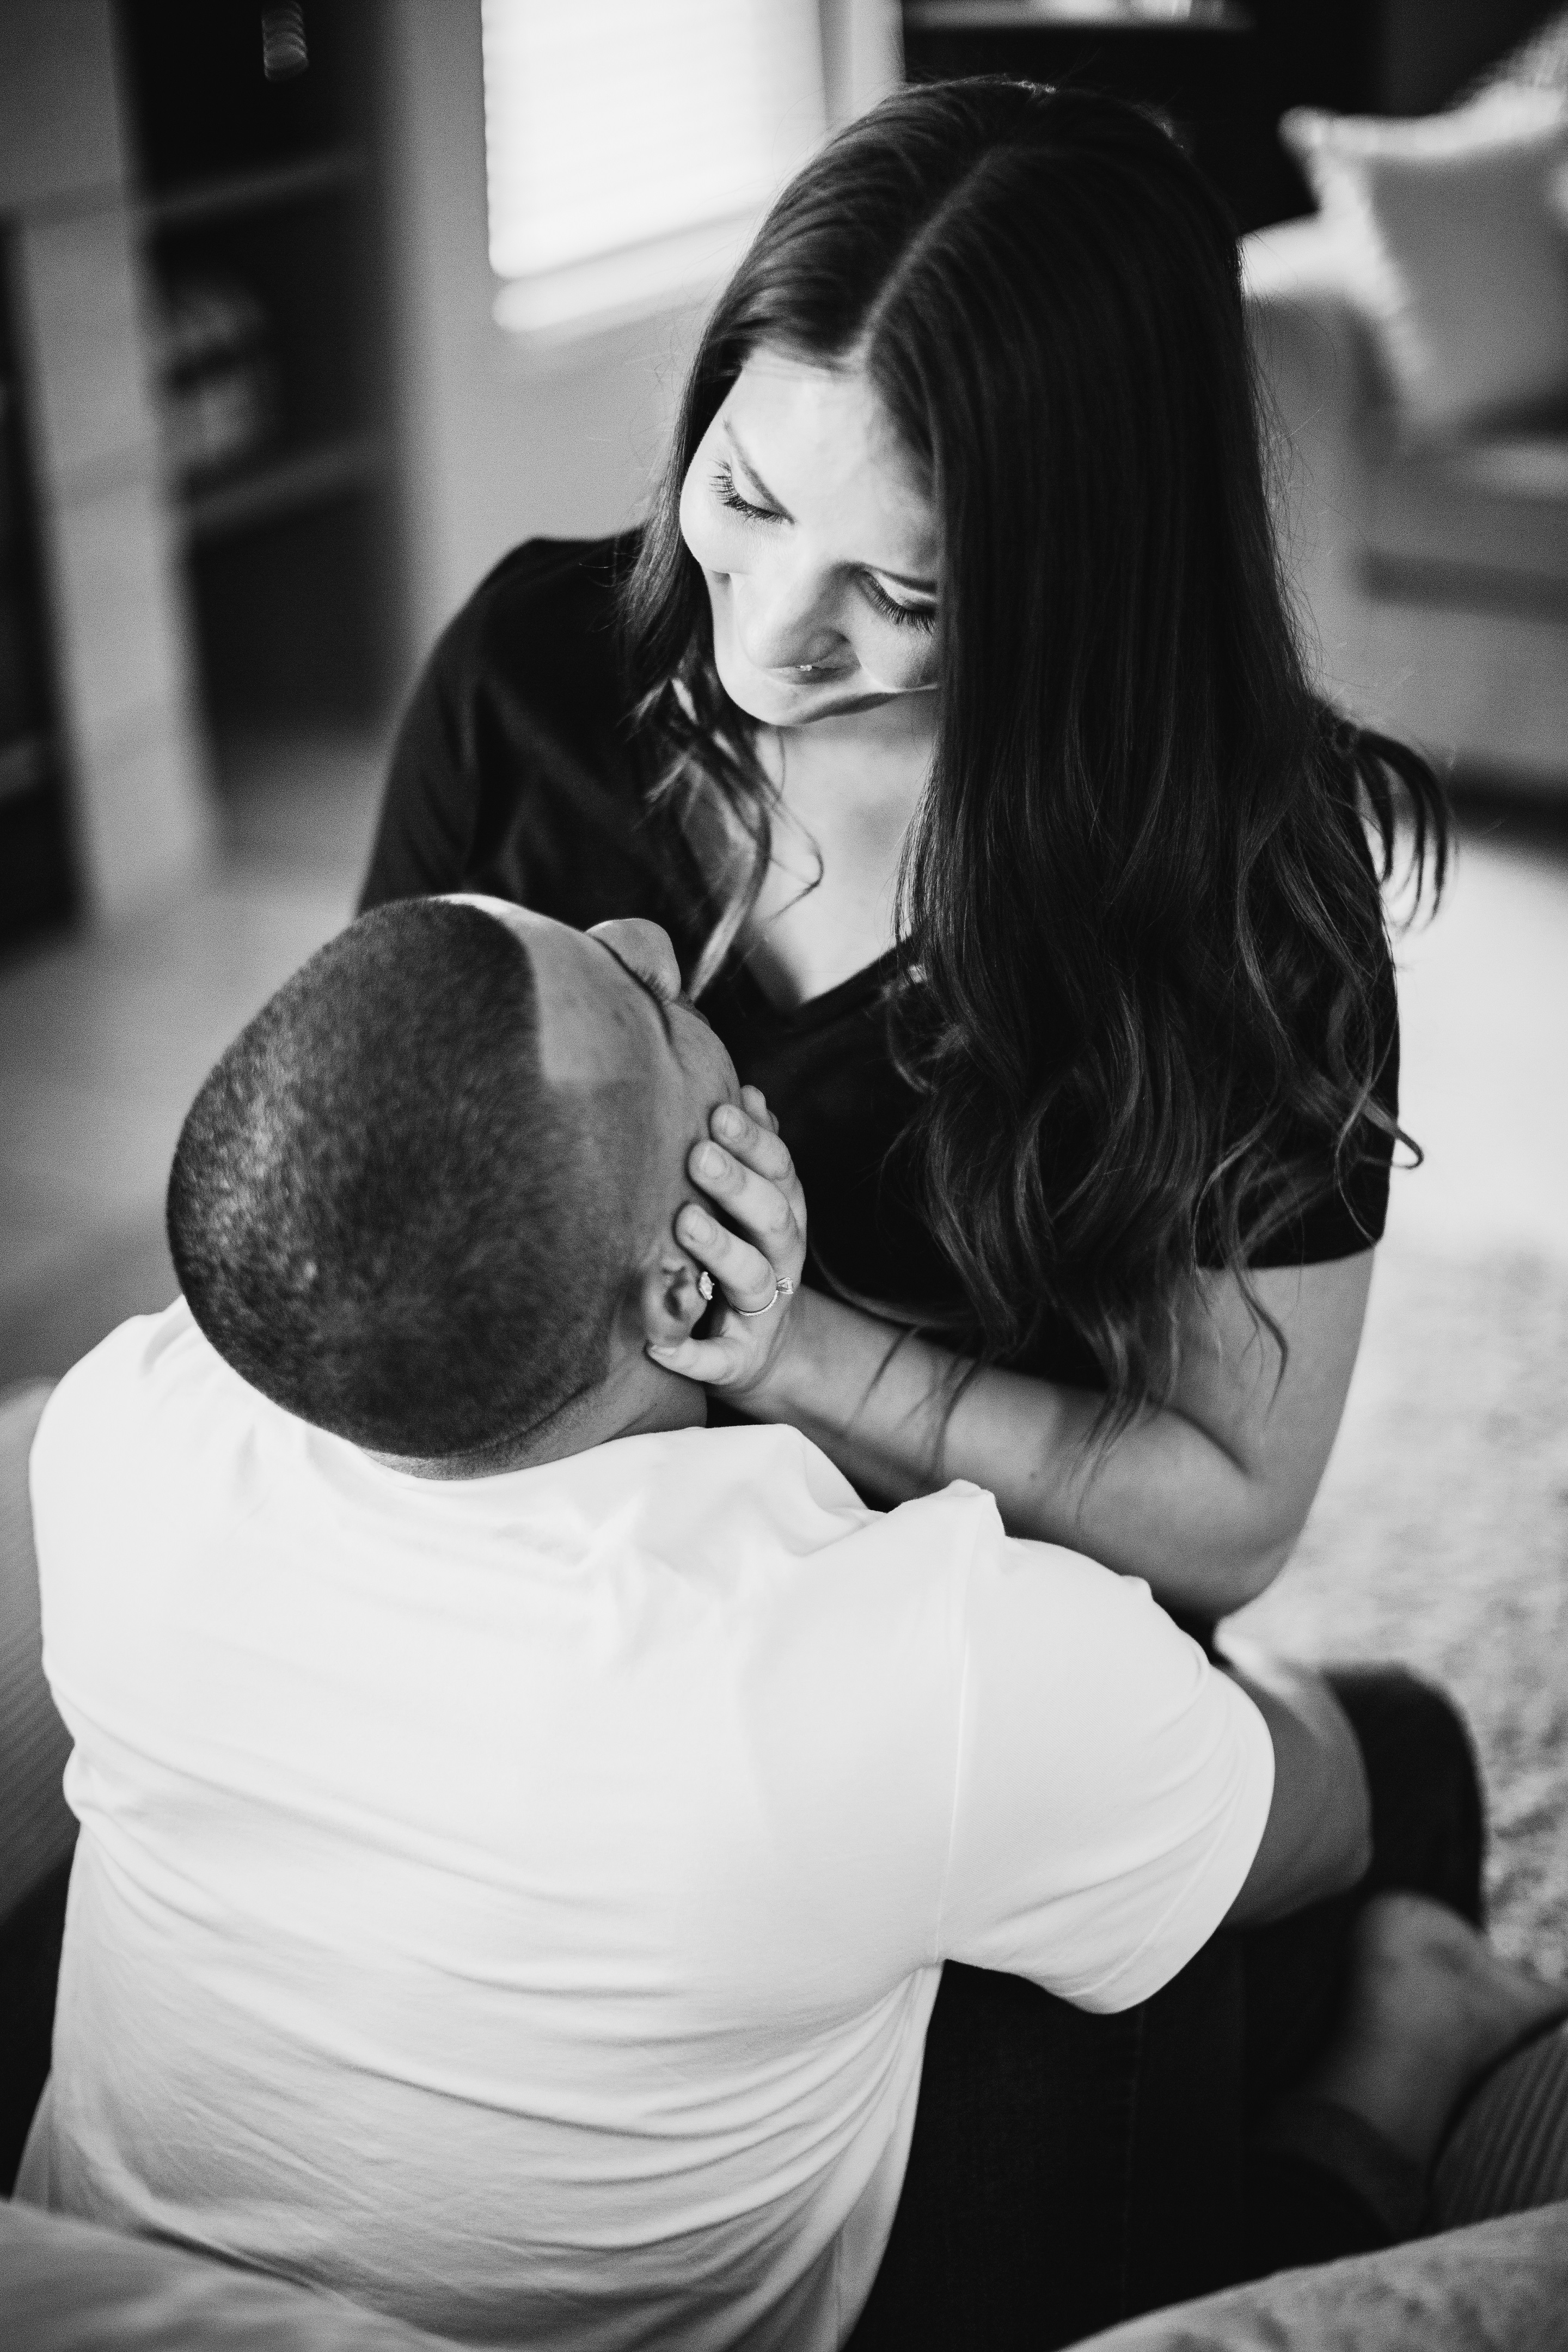 newly engaged couple embracing on the couch for an in home engagement photo shoot